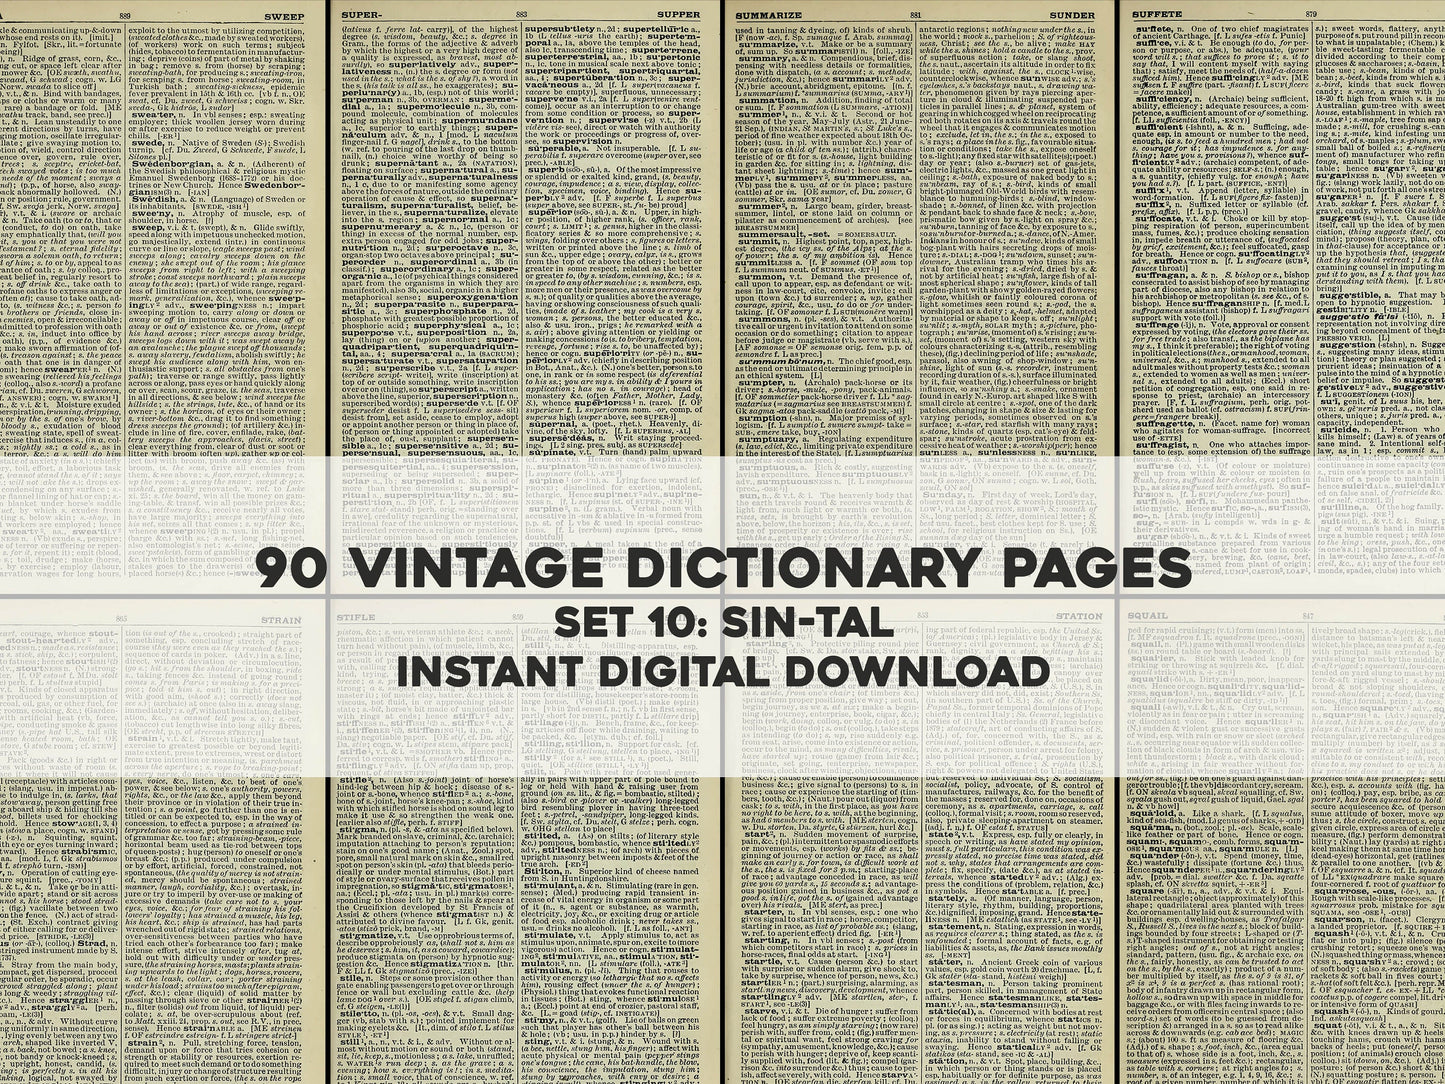 The Concise Oxford Dictionary Set 10 SIN-TAL [90 Images]